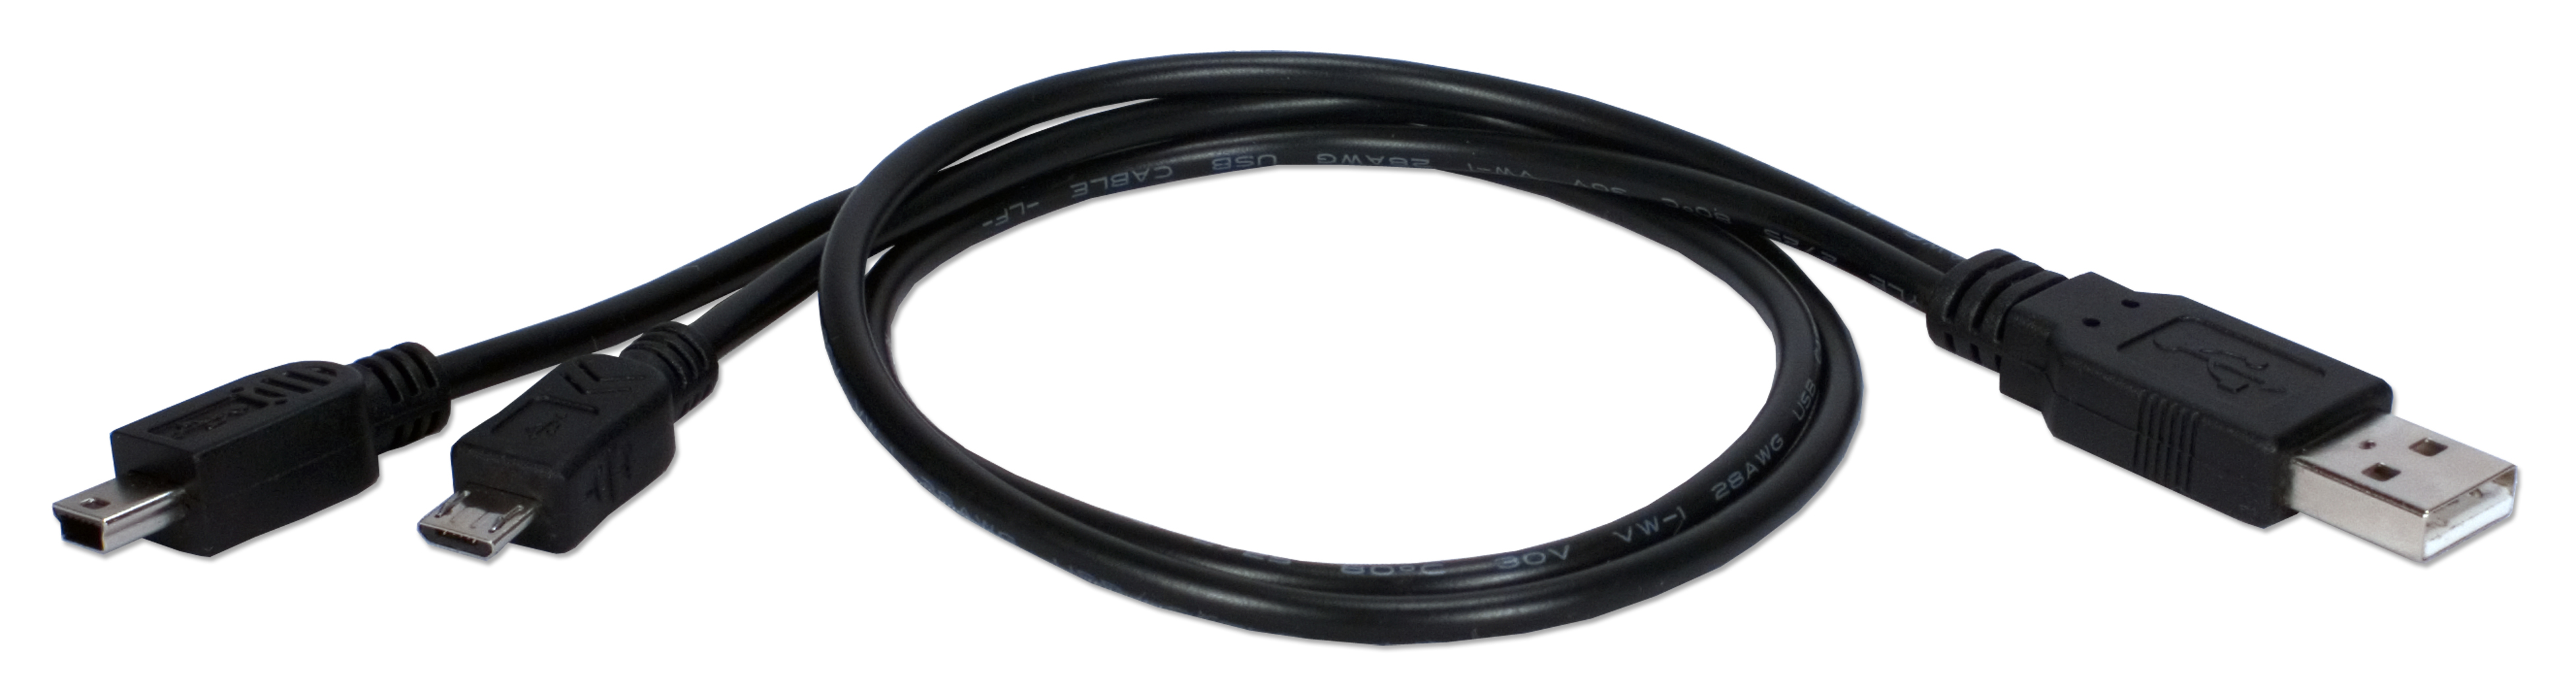 USBPWR-Y - 0.5-Meter Cable with and Micro-B